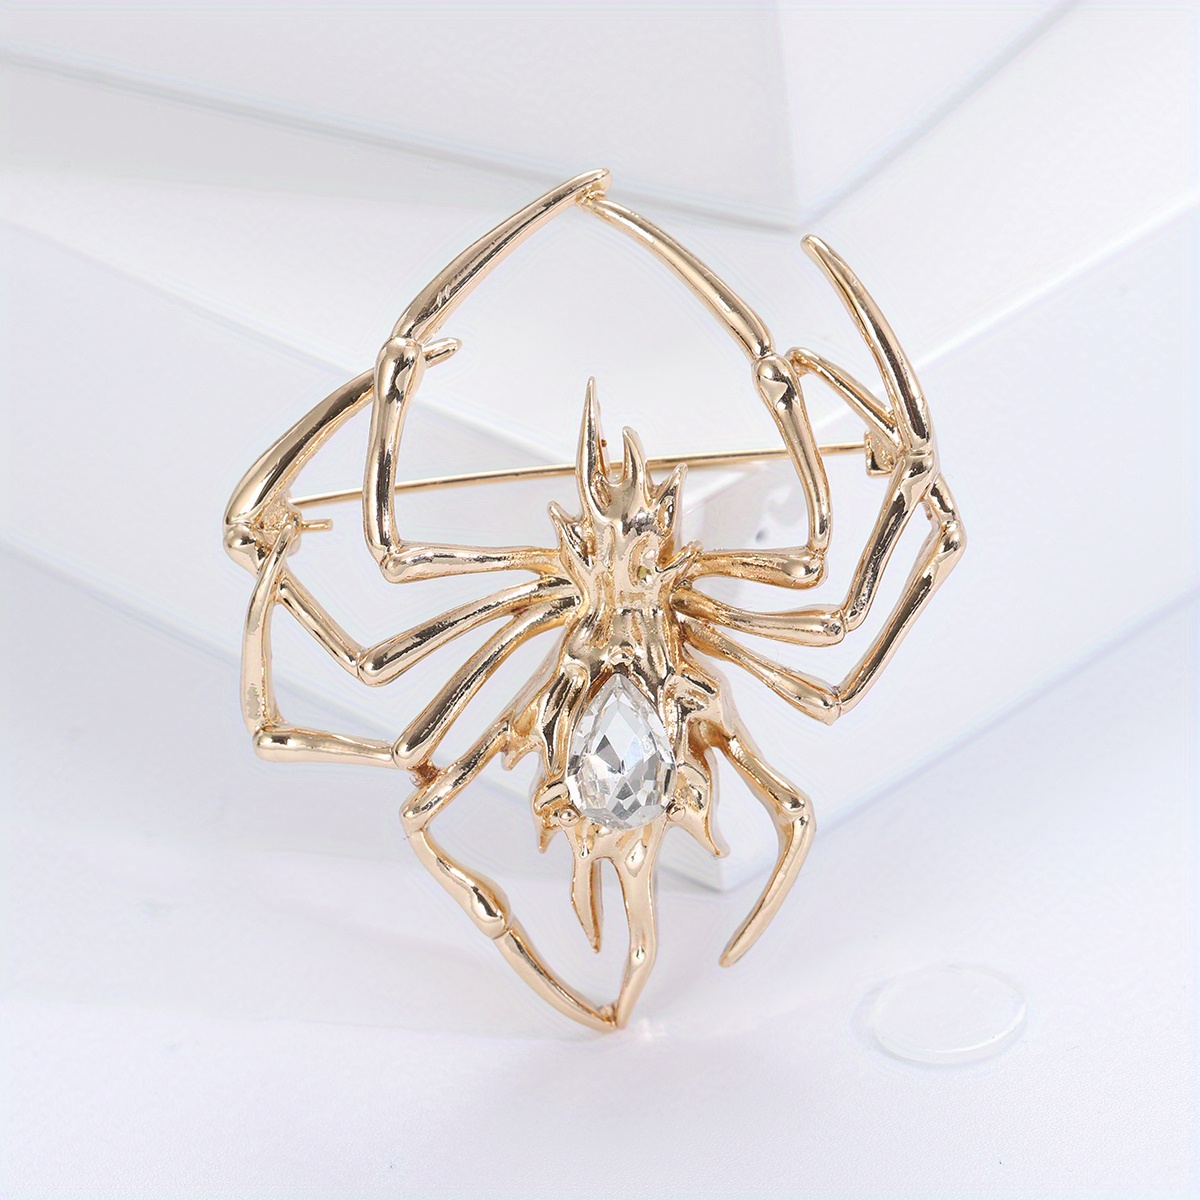 Vintage Style Spider Shape Alloy Brooch Pin Inlaid Colorful Shiny